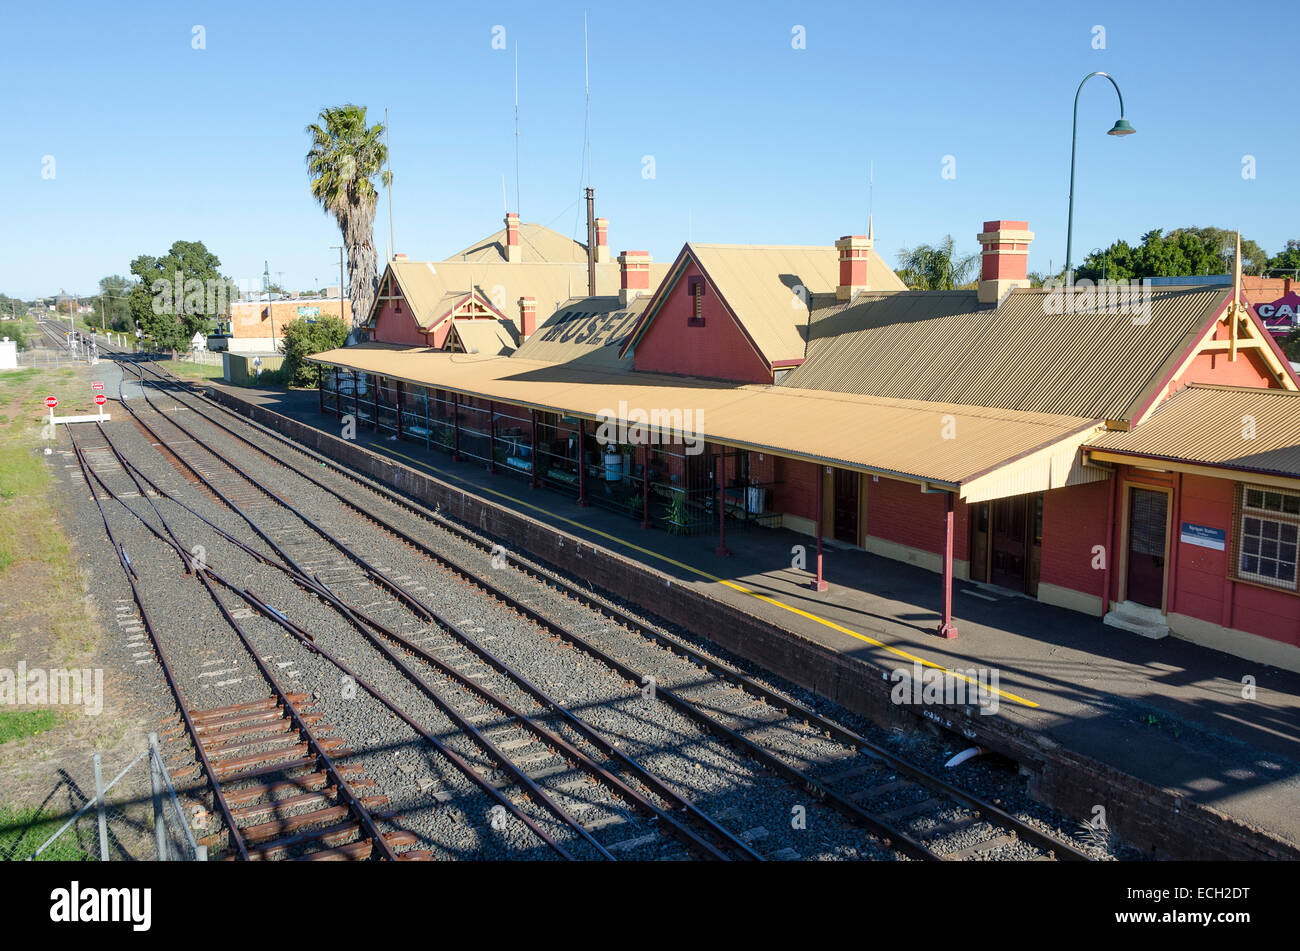 Gare ferroviaire historique, Nyngan, New South Wales, Australie Banque D'Images